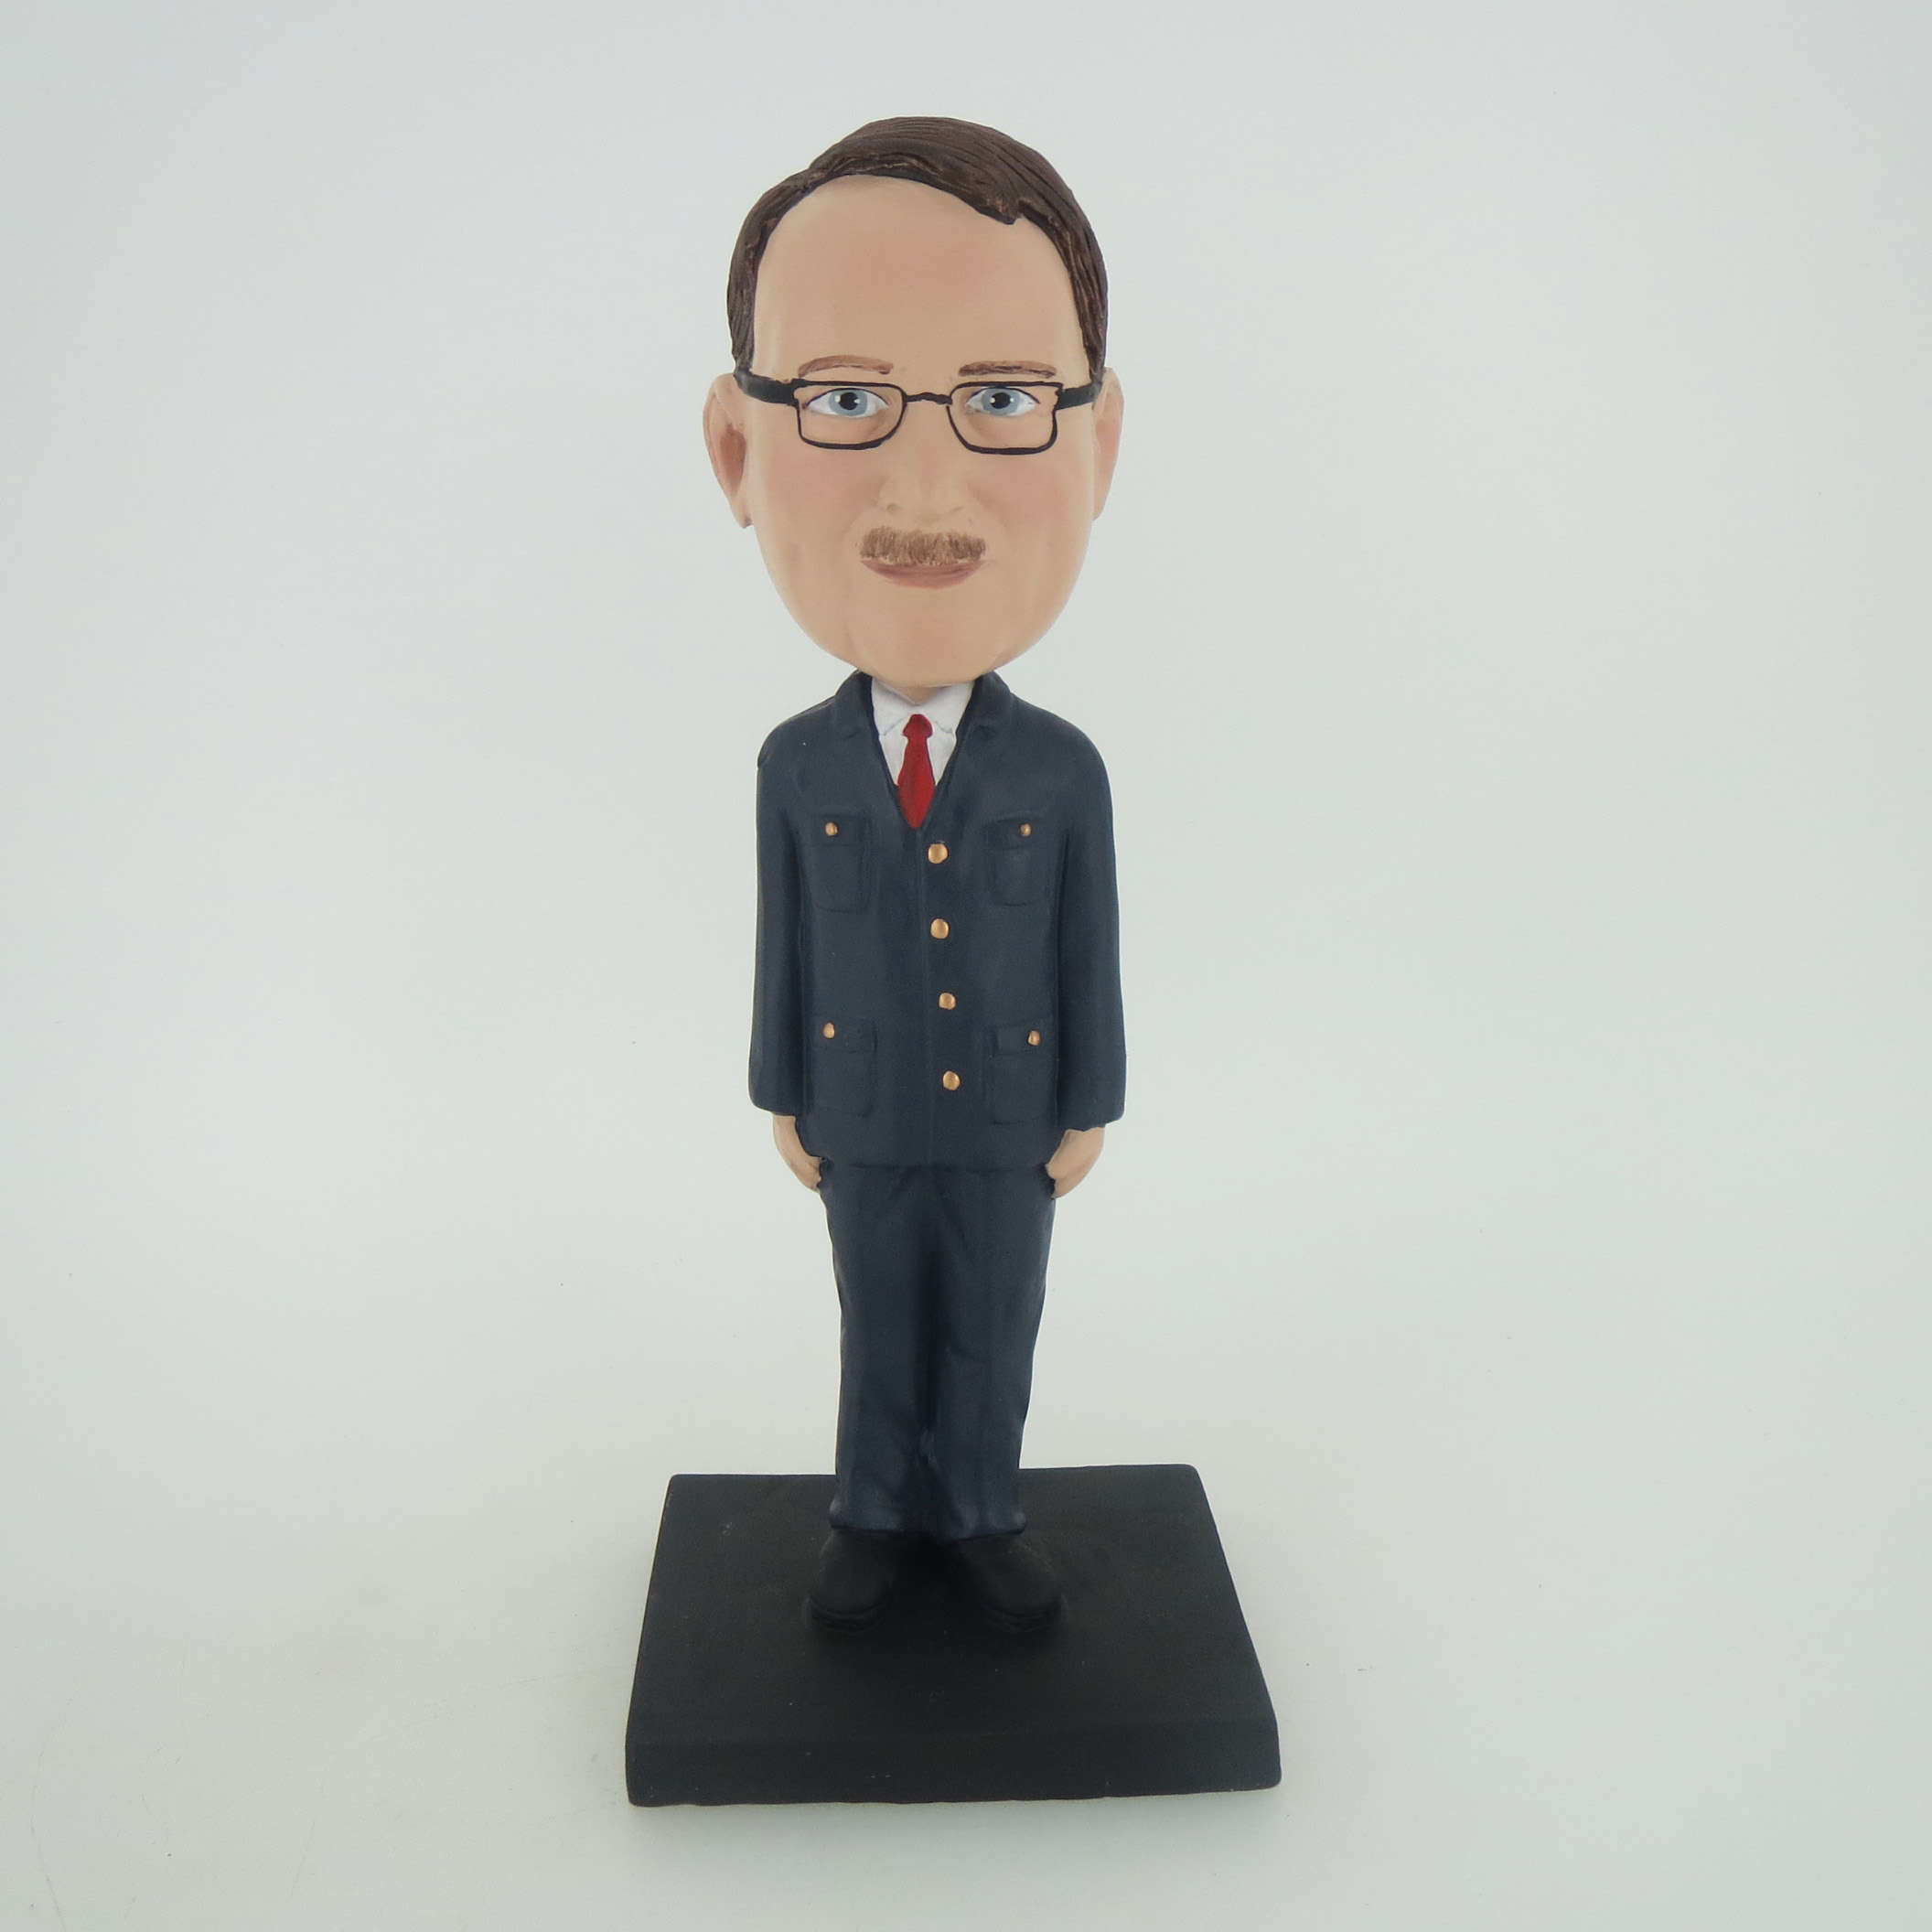 Picture of Custom Bobblehead Doll: Man In Working Suite And Tie